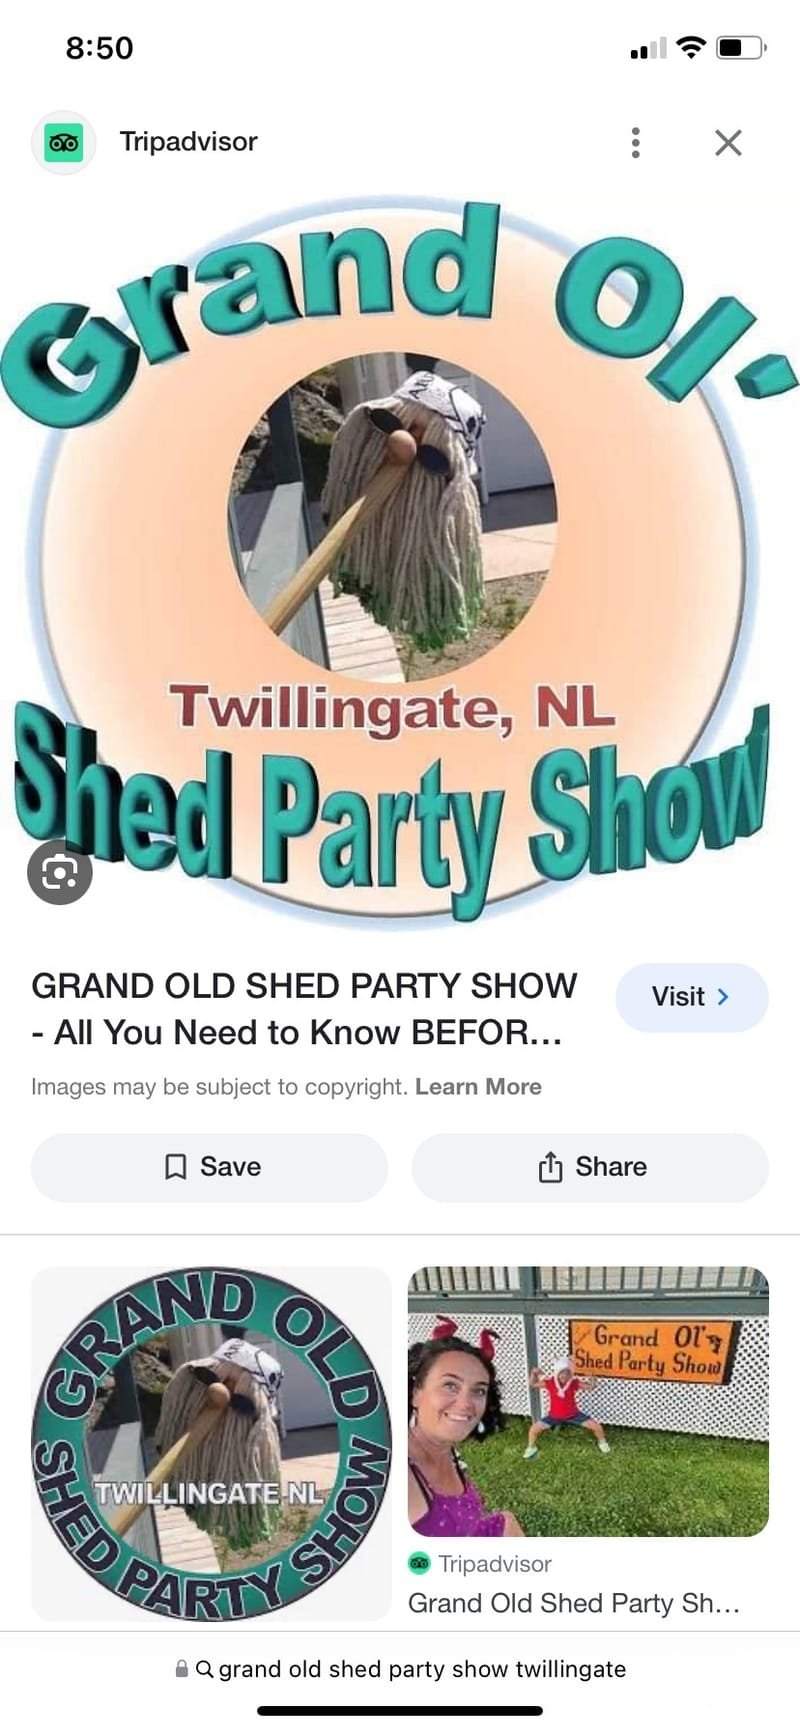 Grand Old Shed Party